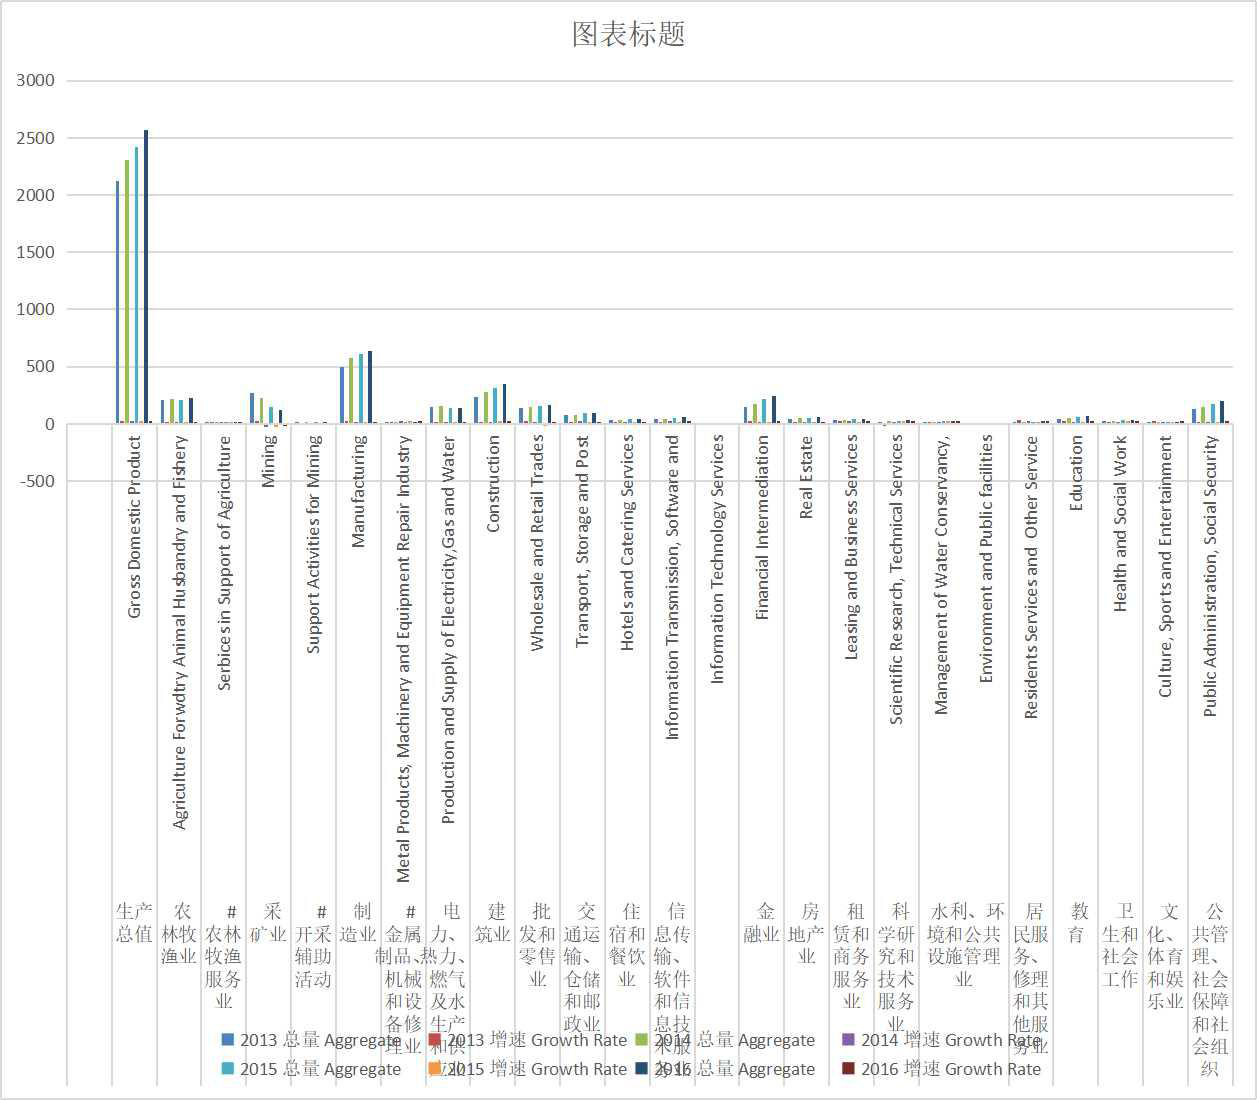 Industry added value and growth rate of Qinghai Province in Main Years (2013-2020)